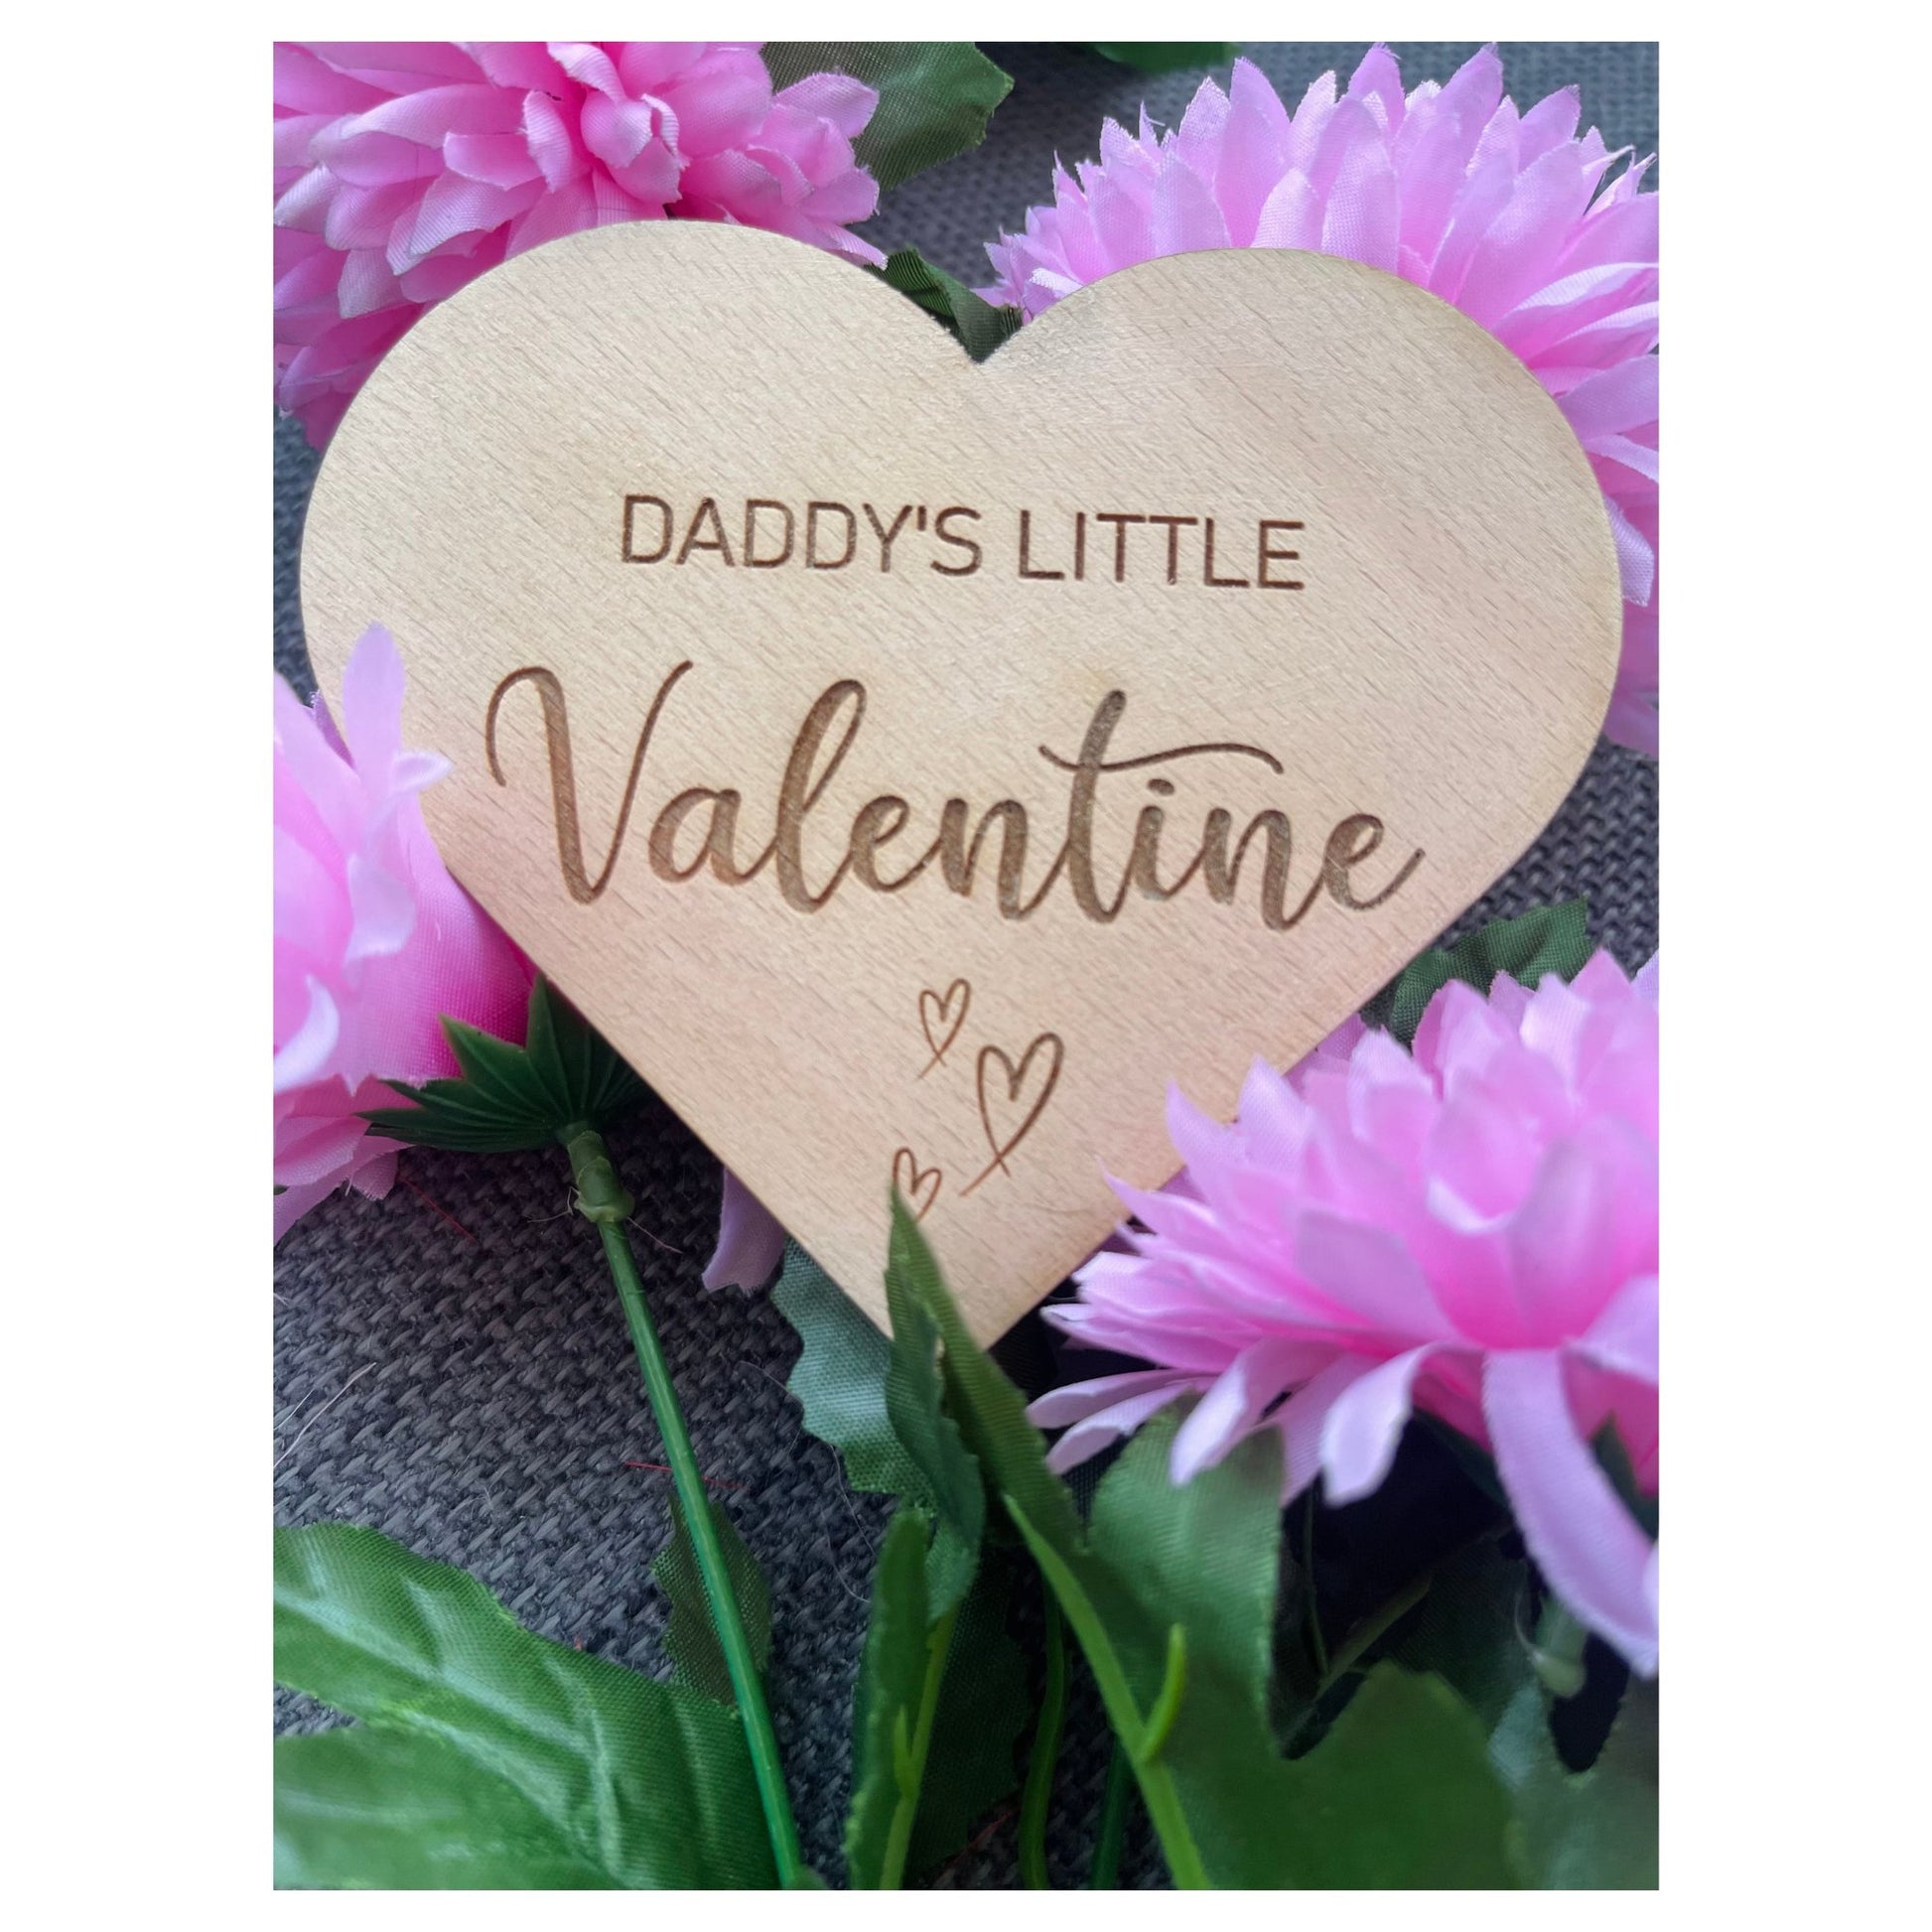 Capture the sweetness of Baby's First Valentine's with our heart-shaped announcement plaque. A perfect gift for new parents, featuring Mummy's, Daddy's & more Little Valentine. Crafted from Beech veneer, Size: 115mm x 100mm, Thickness: 4mm.